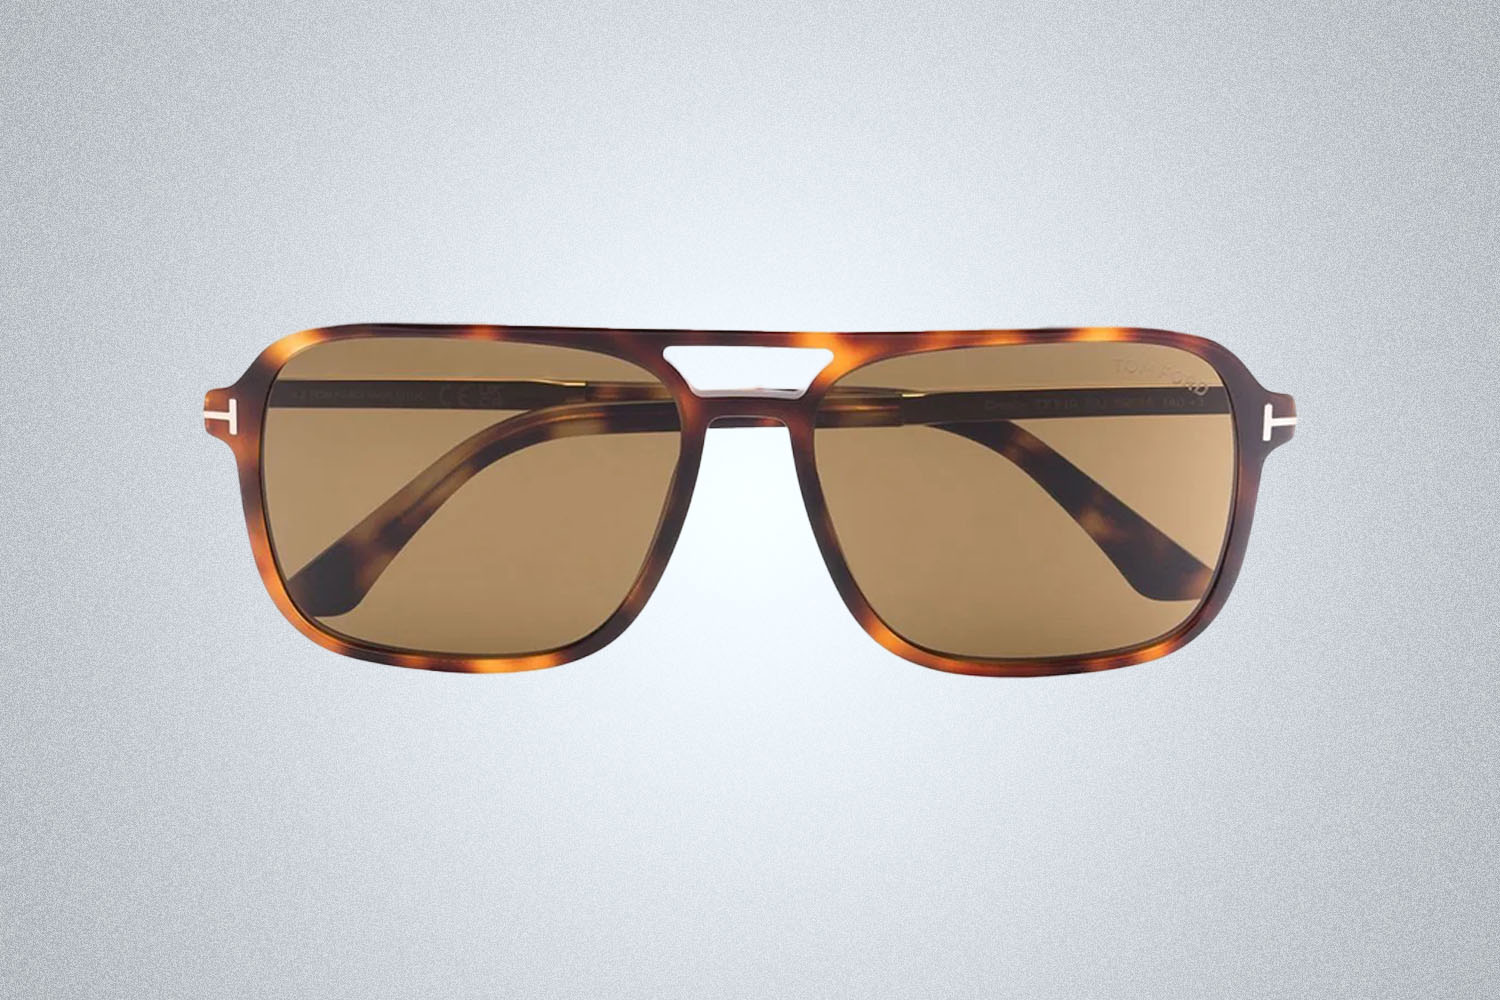 A pair of brown square sunglasses from Tom Ford on a grey background